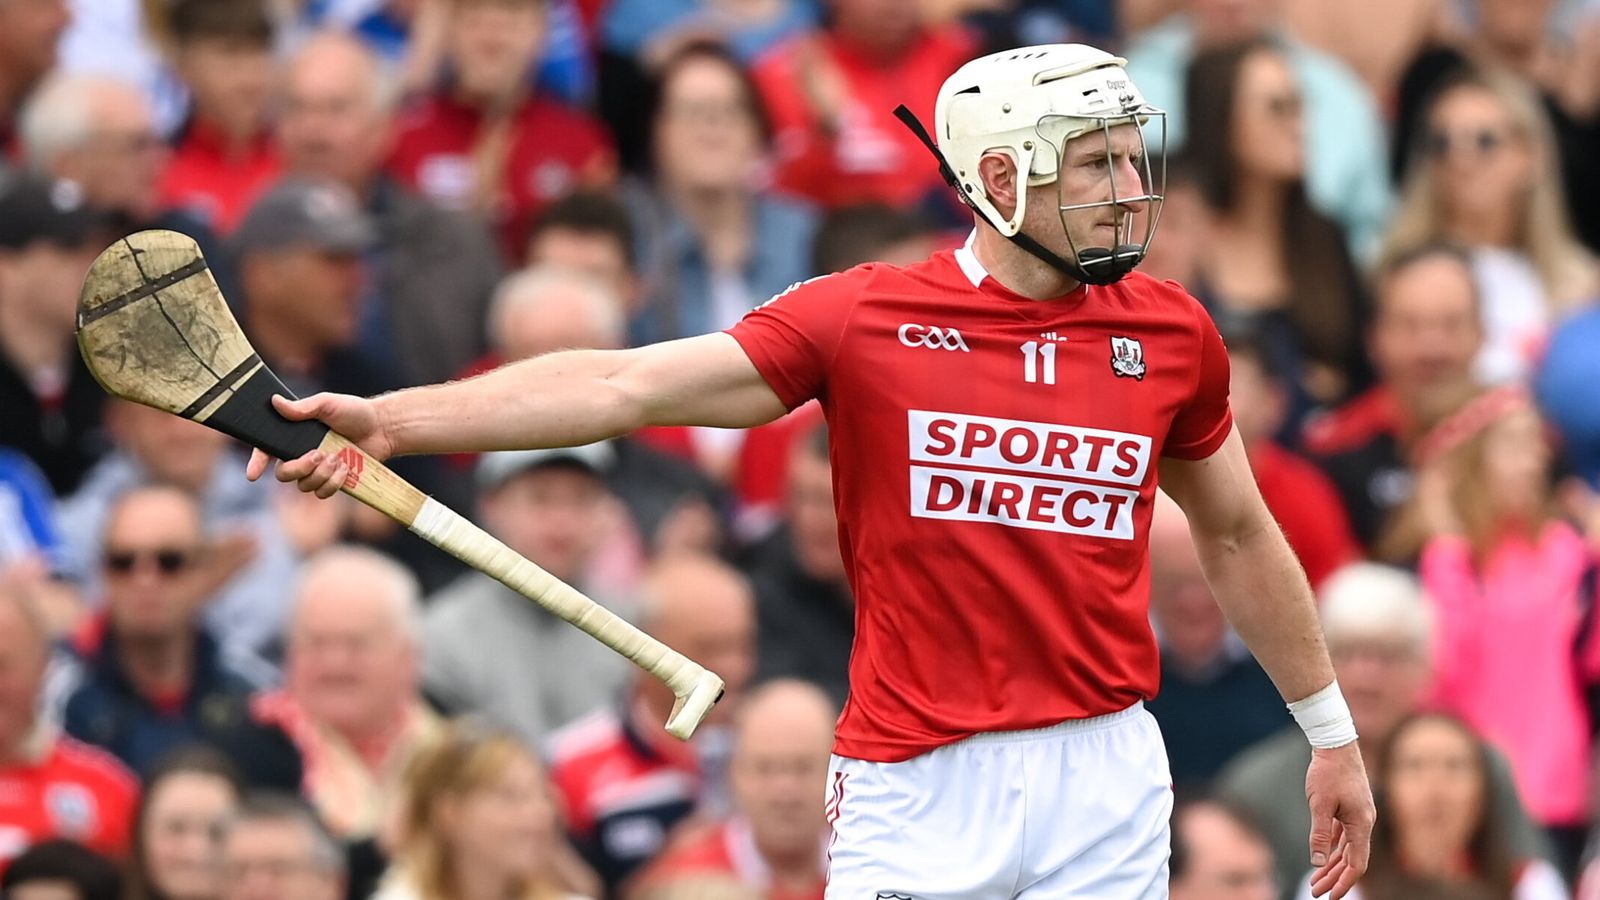 Munster Hurling Championship final day: Tipperary vs Cork, Clare vs Waterford LIVE!